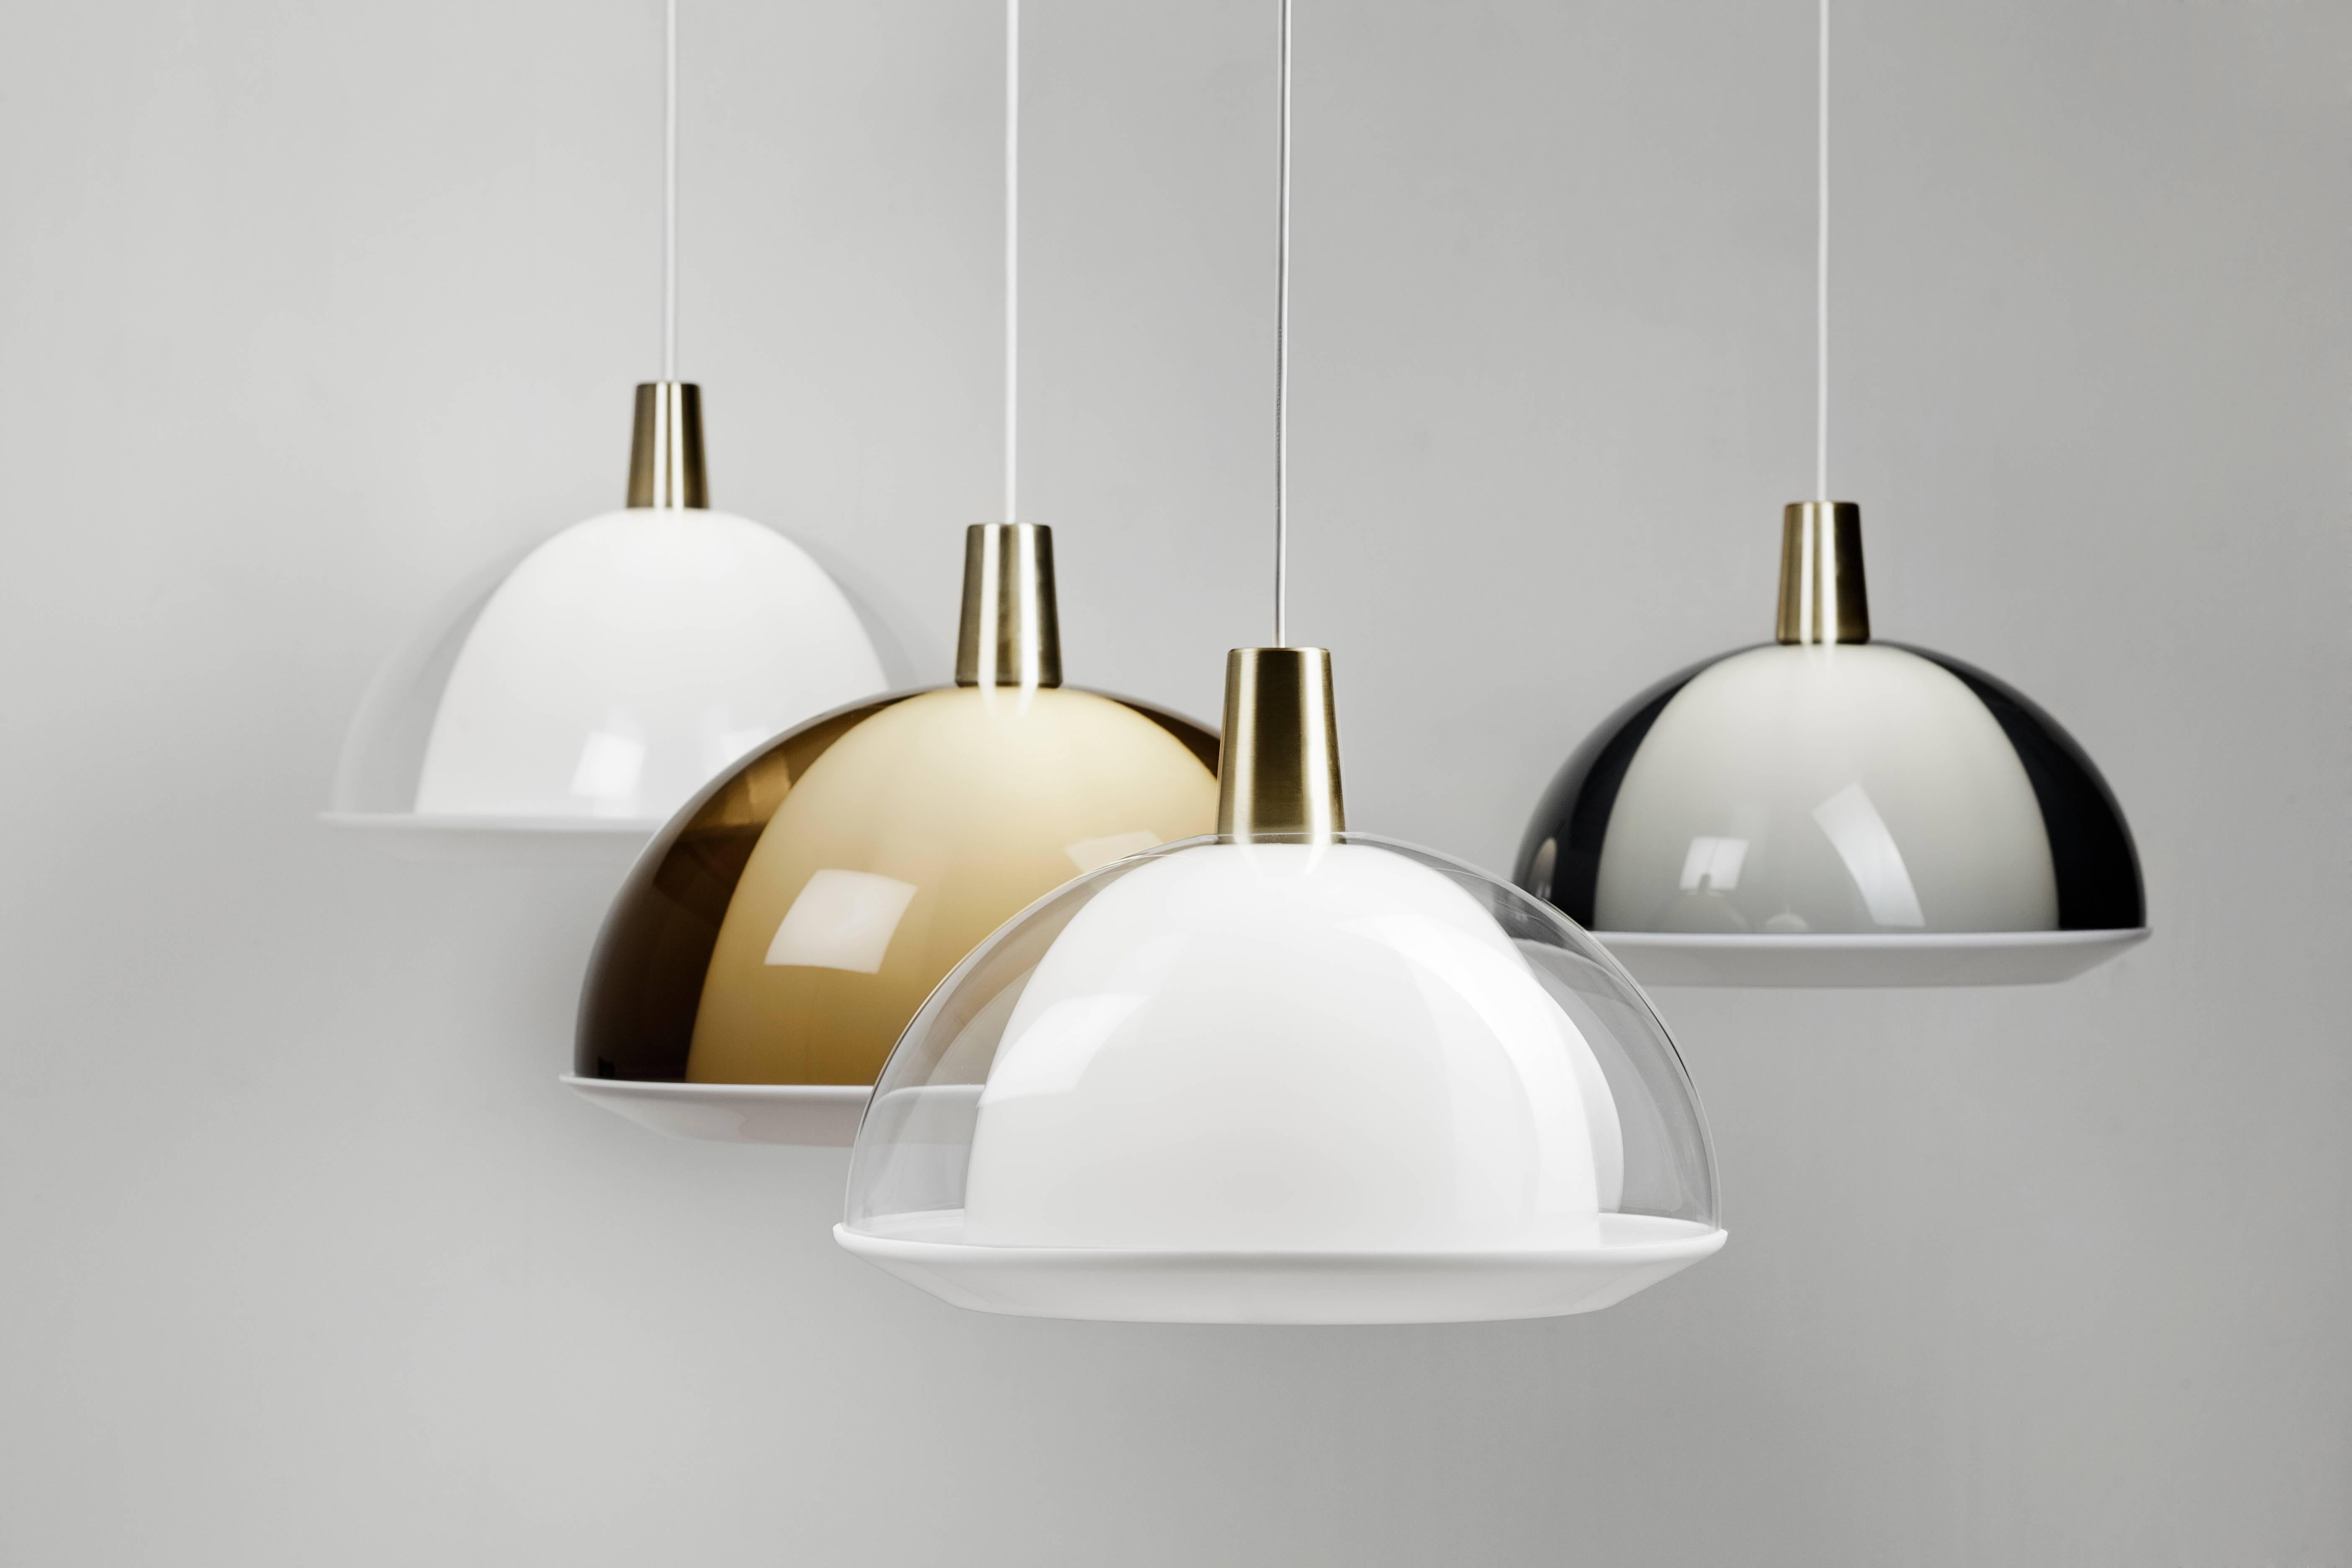 Pair of Small Yki Nummi Transparent 'Kuplat' Pendants. Designed in 1959, Nummi's iconic light consists of two acrylic shades of different colors, one nesting inside the other. The name Kuplat means bubbles in Finnish. As Nummi once astutely